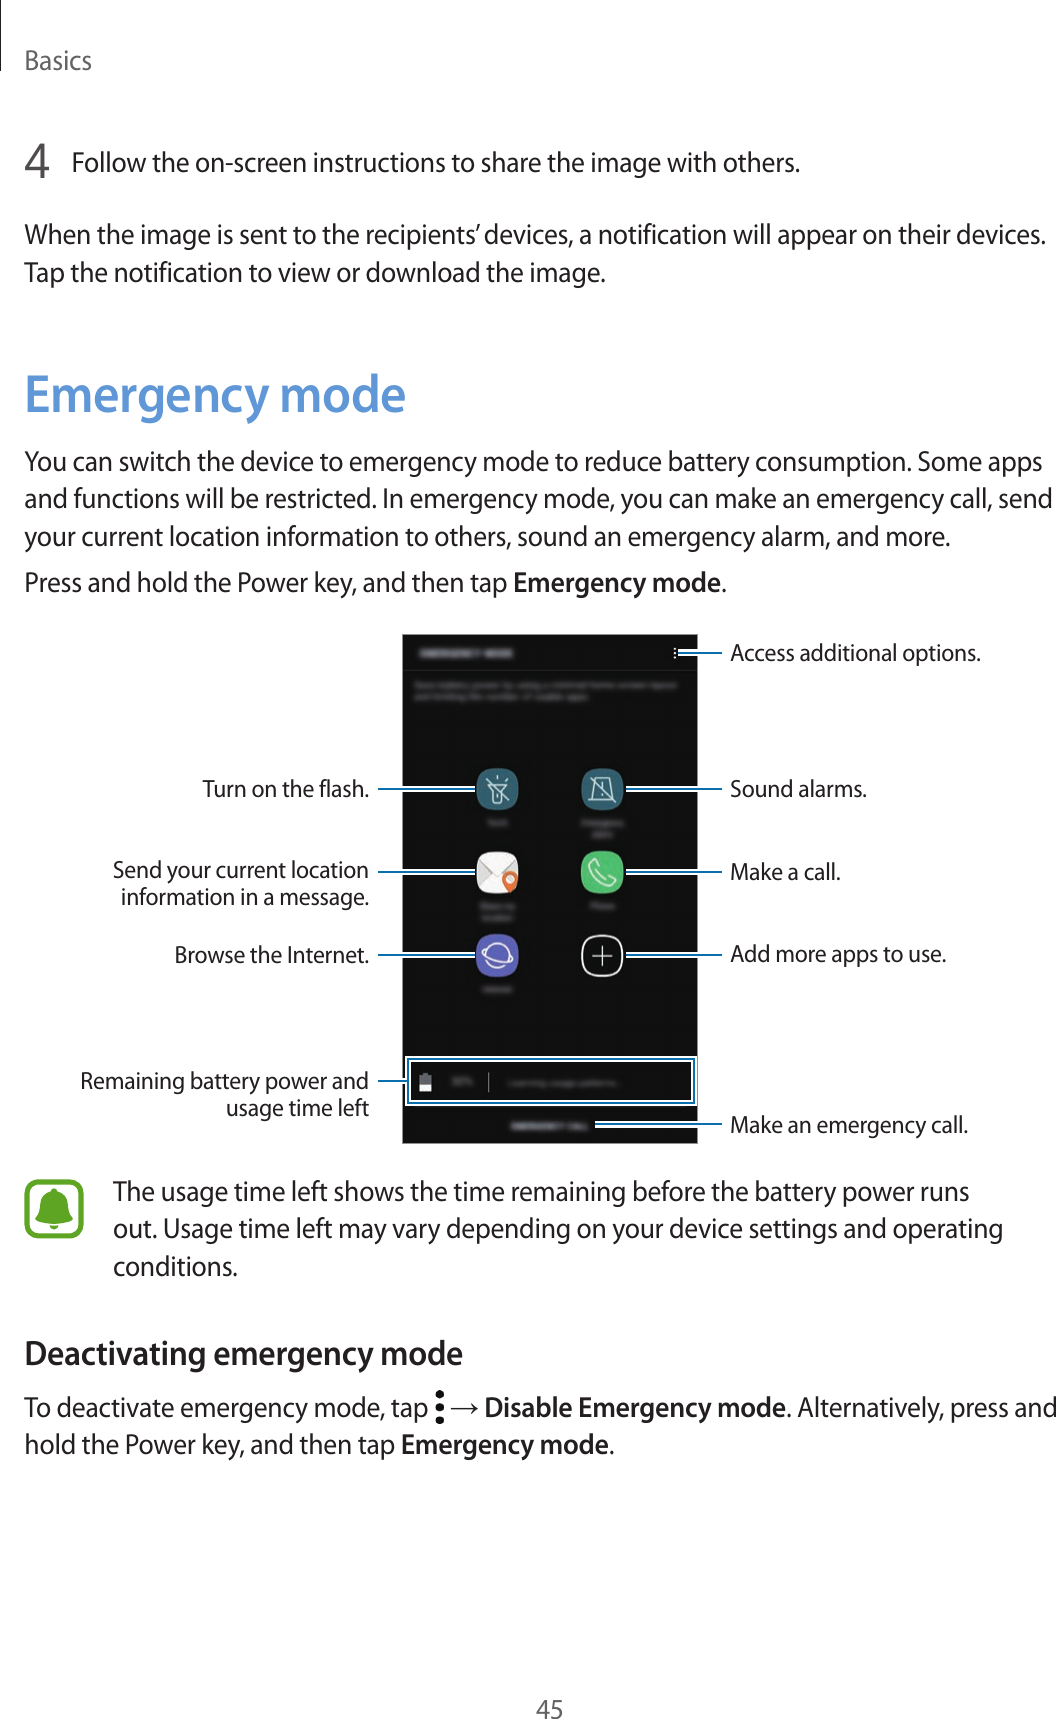 Basics454  Follow the on-screen instructions to share the image with others.When the image is sent to the recipients’ devices, a notification will appear on their devices. Tap the notification to view or download the image.Emergency modeYou can switch the device to emergency mode to reduce battery consumption. Some apps and functions will be restricted. In emergency mode, you can make an emergency call, send your current location information to others, sound an emergency alarm, and more.Press and hold the Power key, and then tap Emergency mode.Add more apps to use.Make an emergency call.Remaining battery power and usage time leftTurn on the flash.Make a call.Send your current location information in a message.Browse the Internet.Access additional options.Sound alarms.The usage time left shows the time remaining before the battery power runs out. Usage time left may vary depending on your device settings and operating conditions.Deactivating emergency modeTo deactivate emergency mode, tap   → Disable Emergency mode. Alternatively, press and hold the Power key, and then tap Emergency mode.